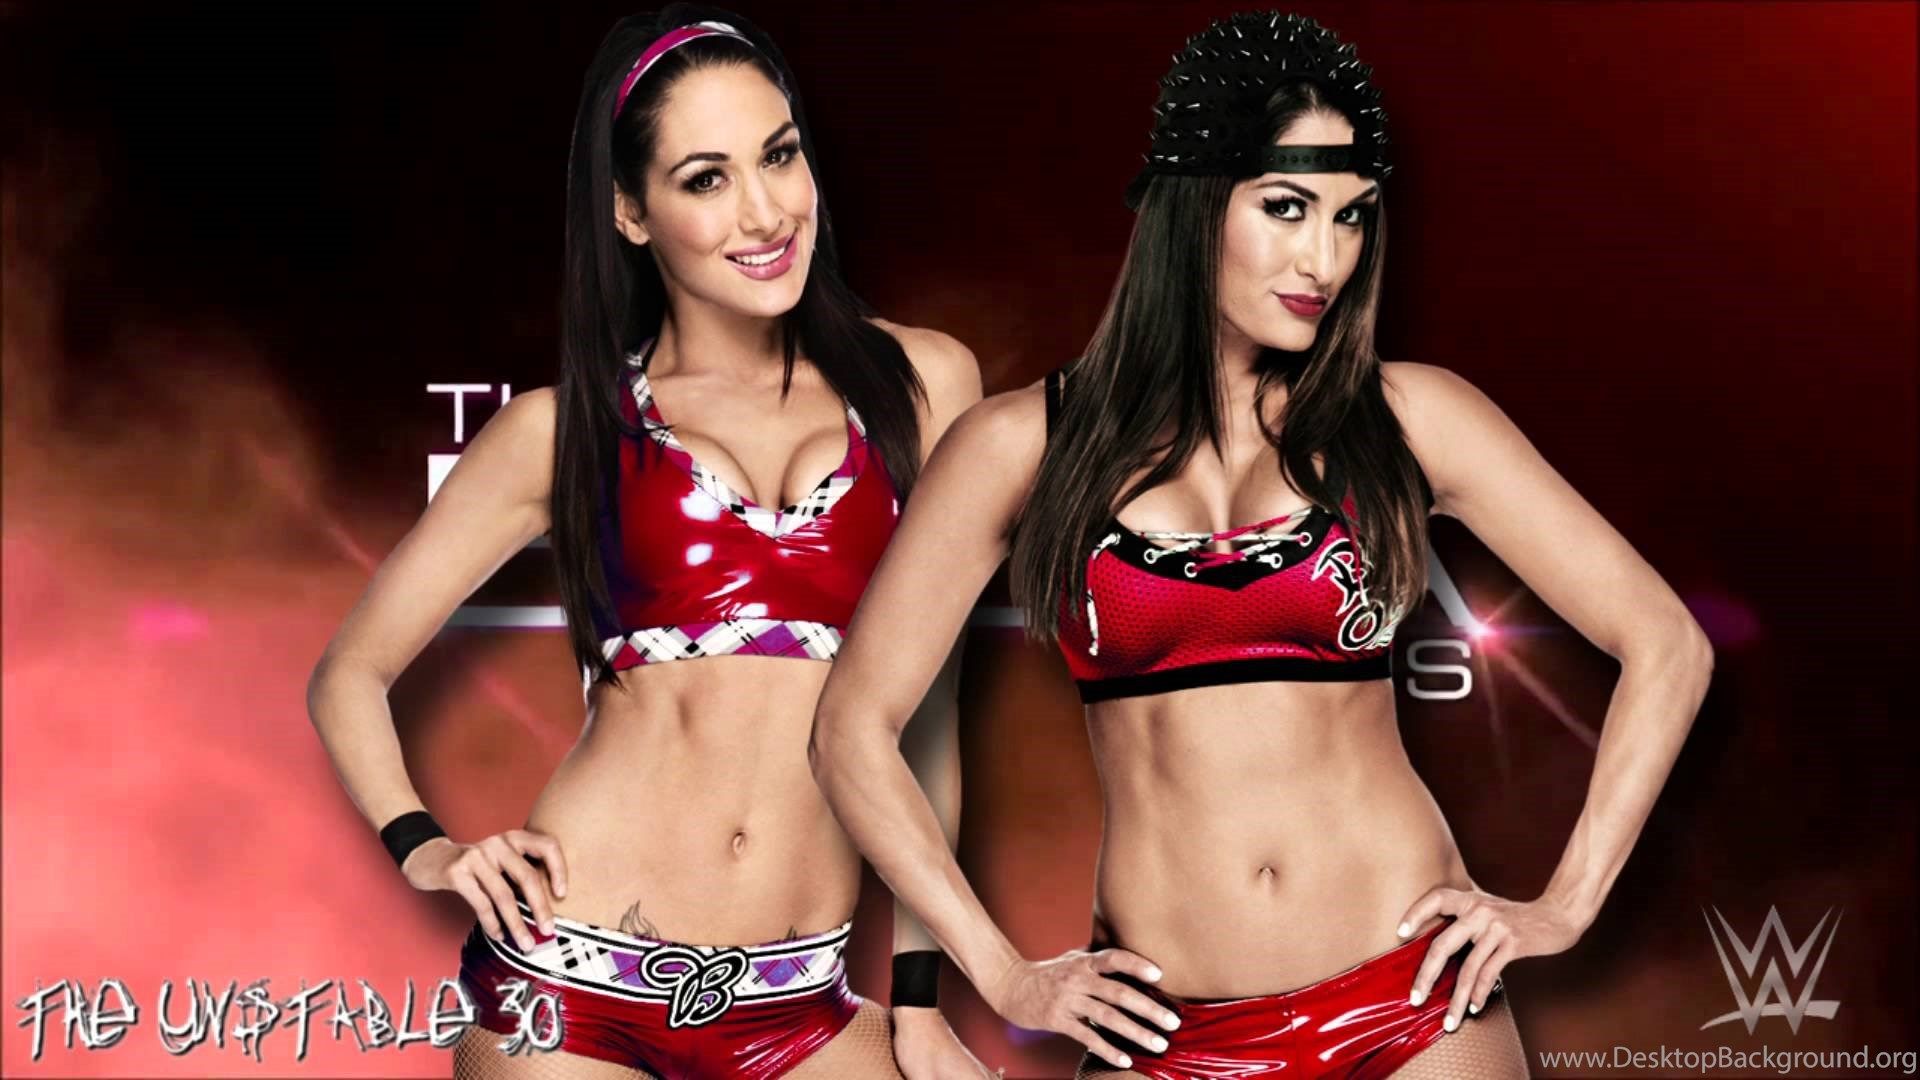 The Bella Twins 4th WWE Theme Song For 30 Minutes You Can Look